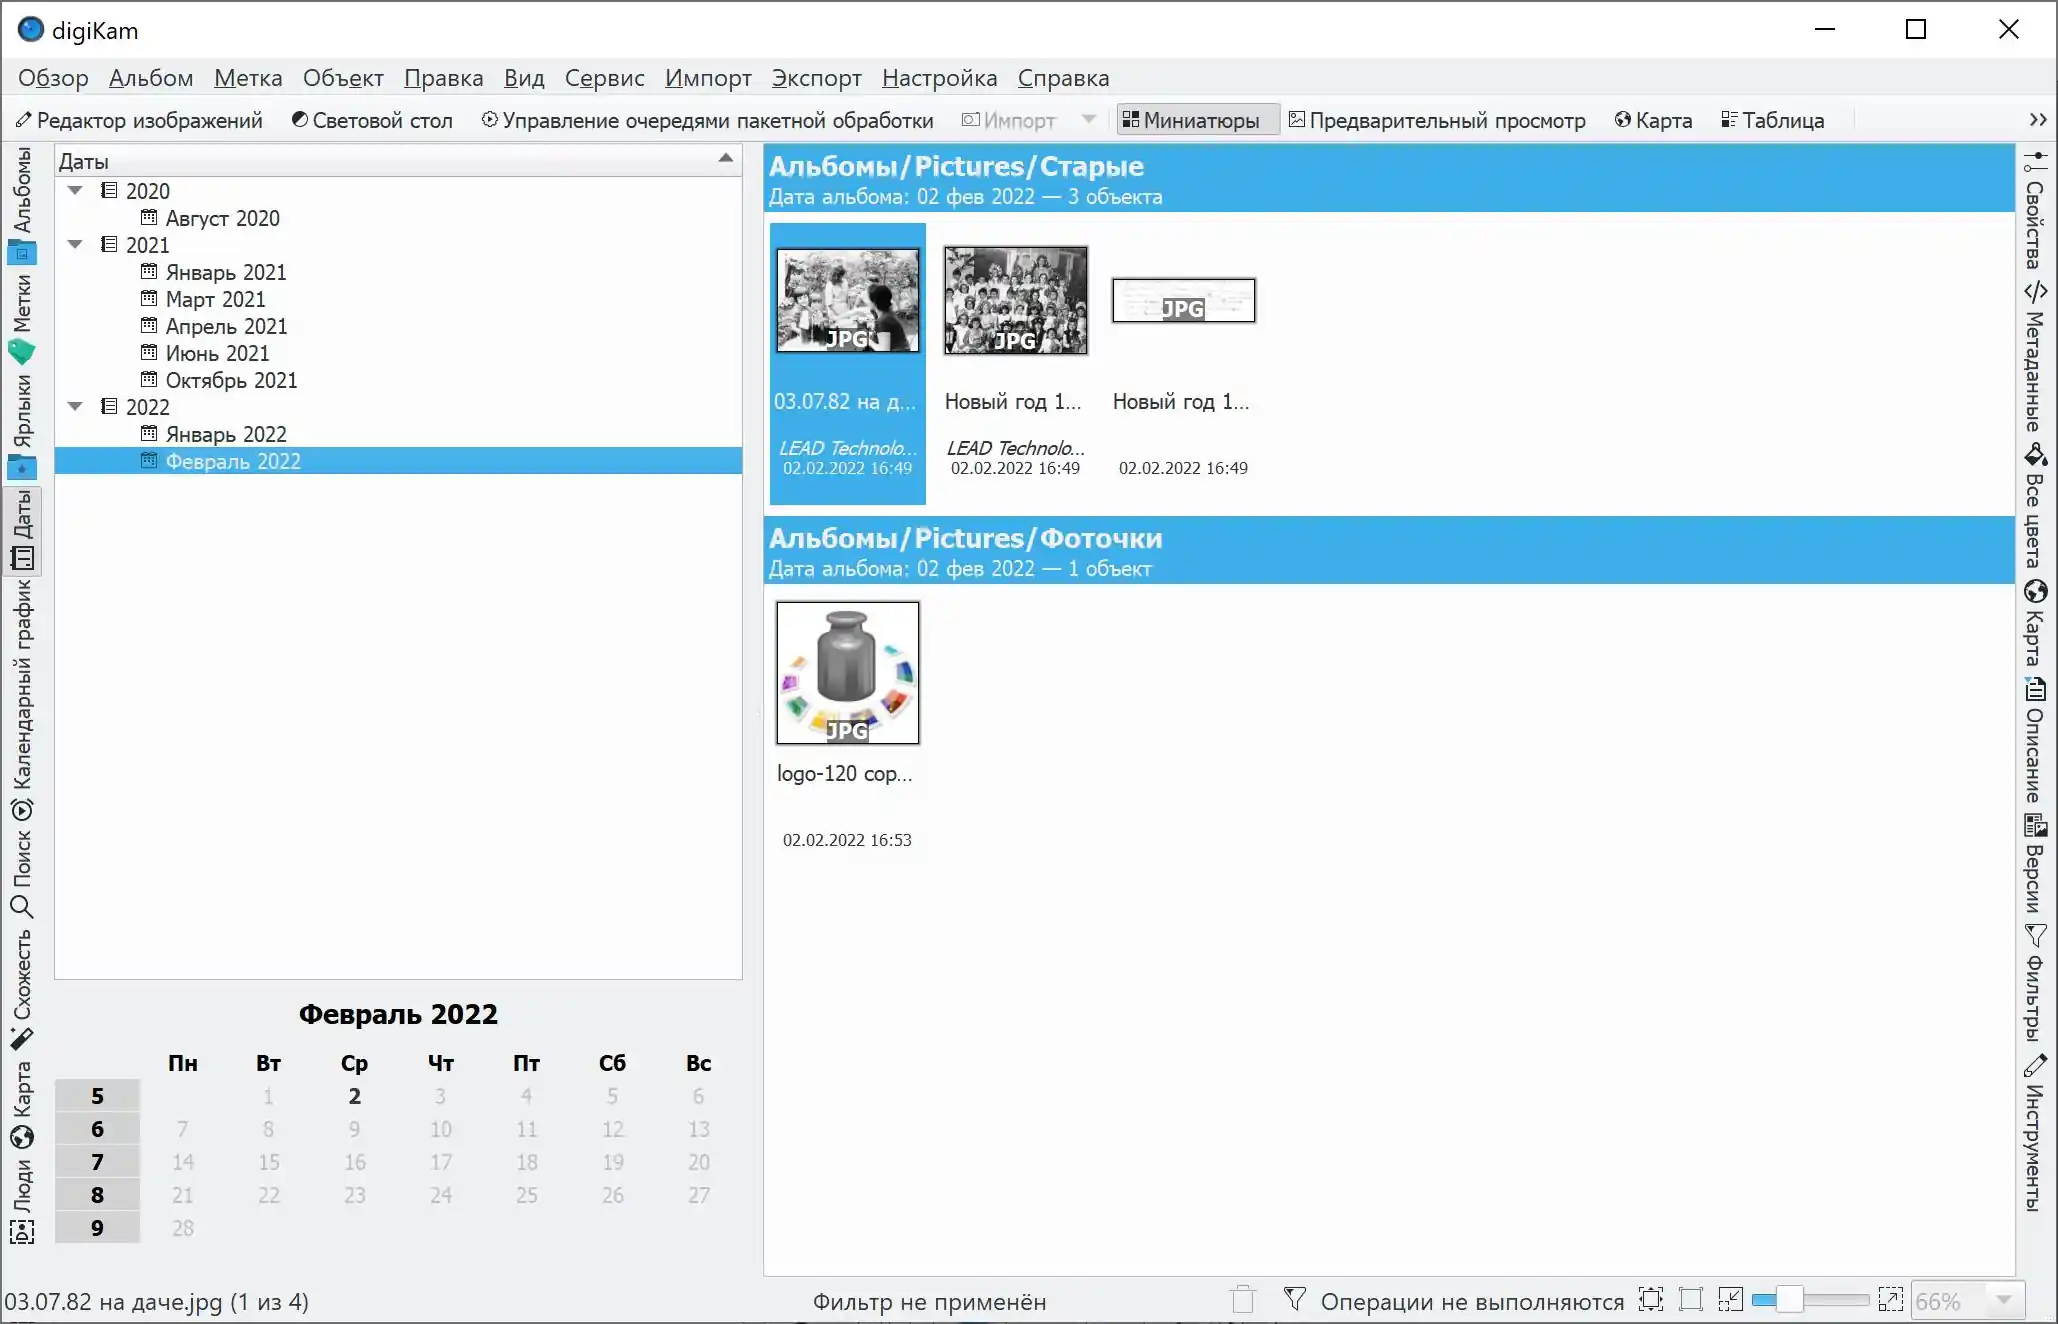 The specific interface of the digiKam application - this is how the timeline is implemented